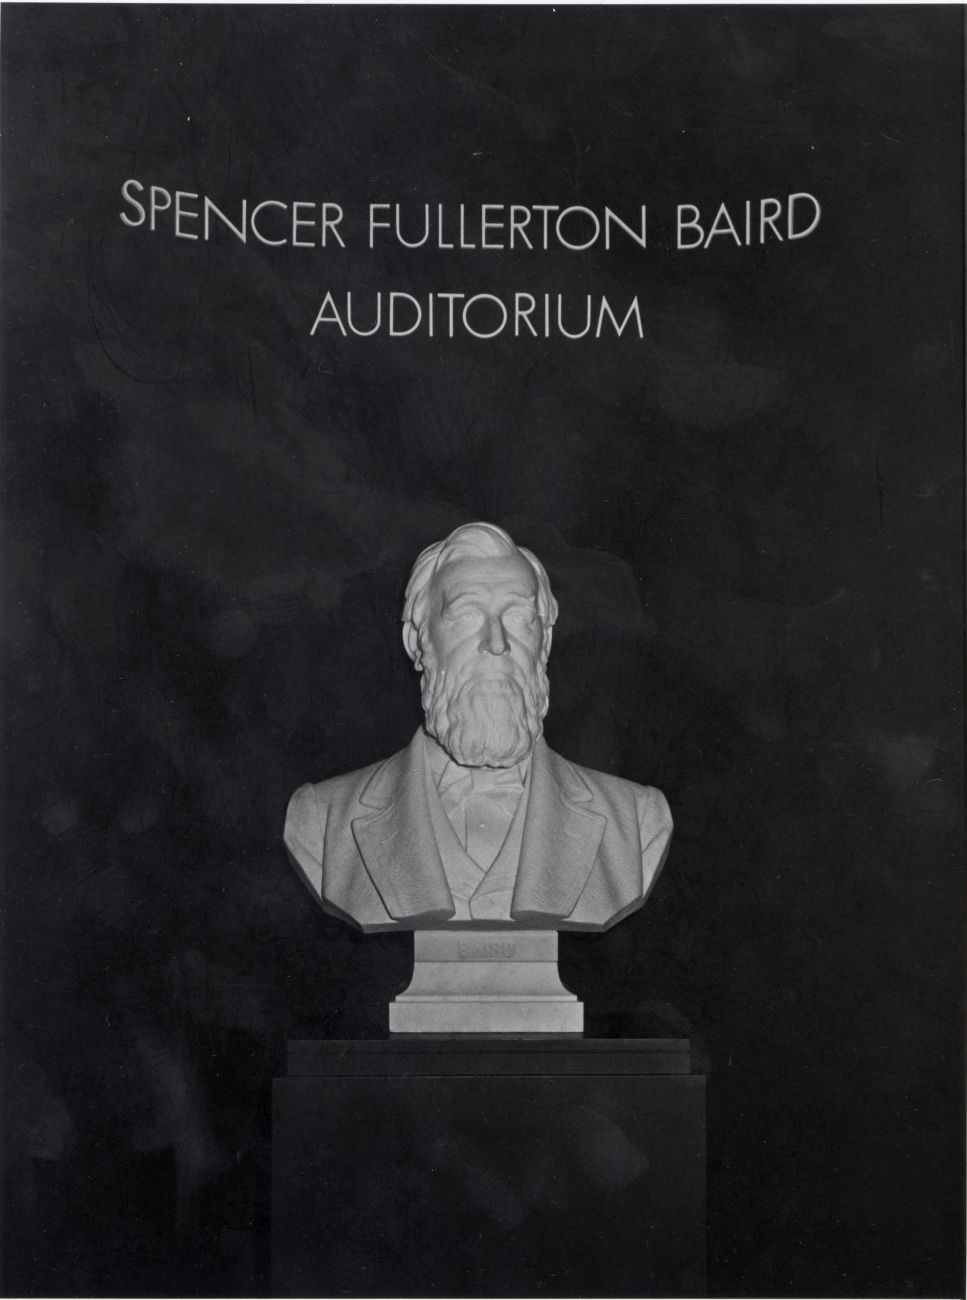 Statue of Spencer Fullerton Baird at the Smithsonian Institution NationalMuseum of Natural History